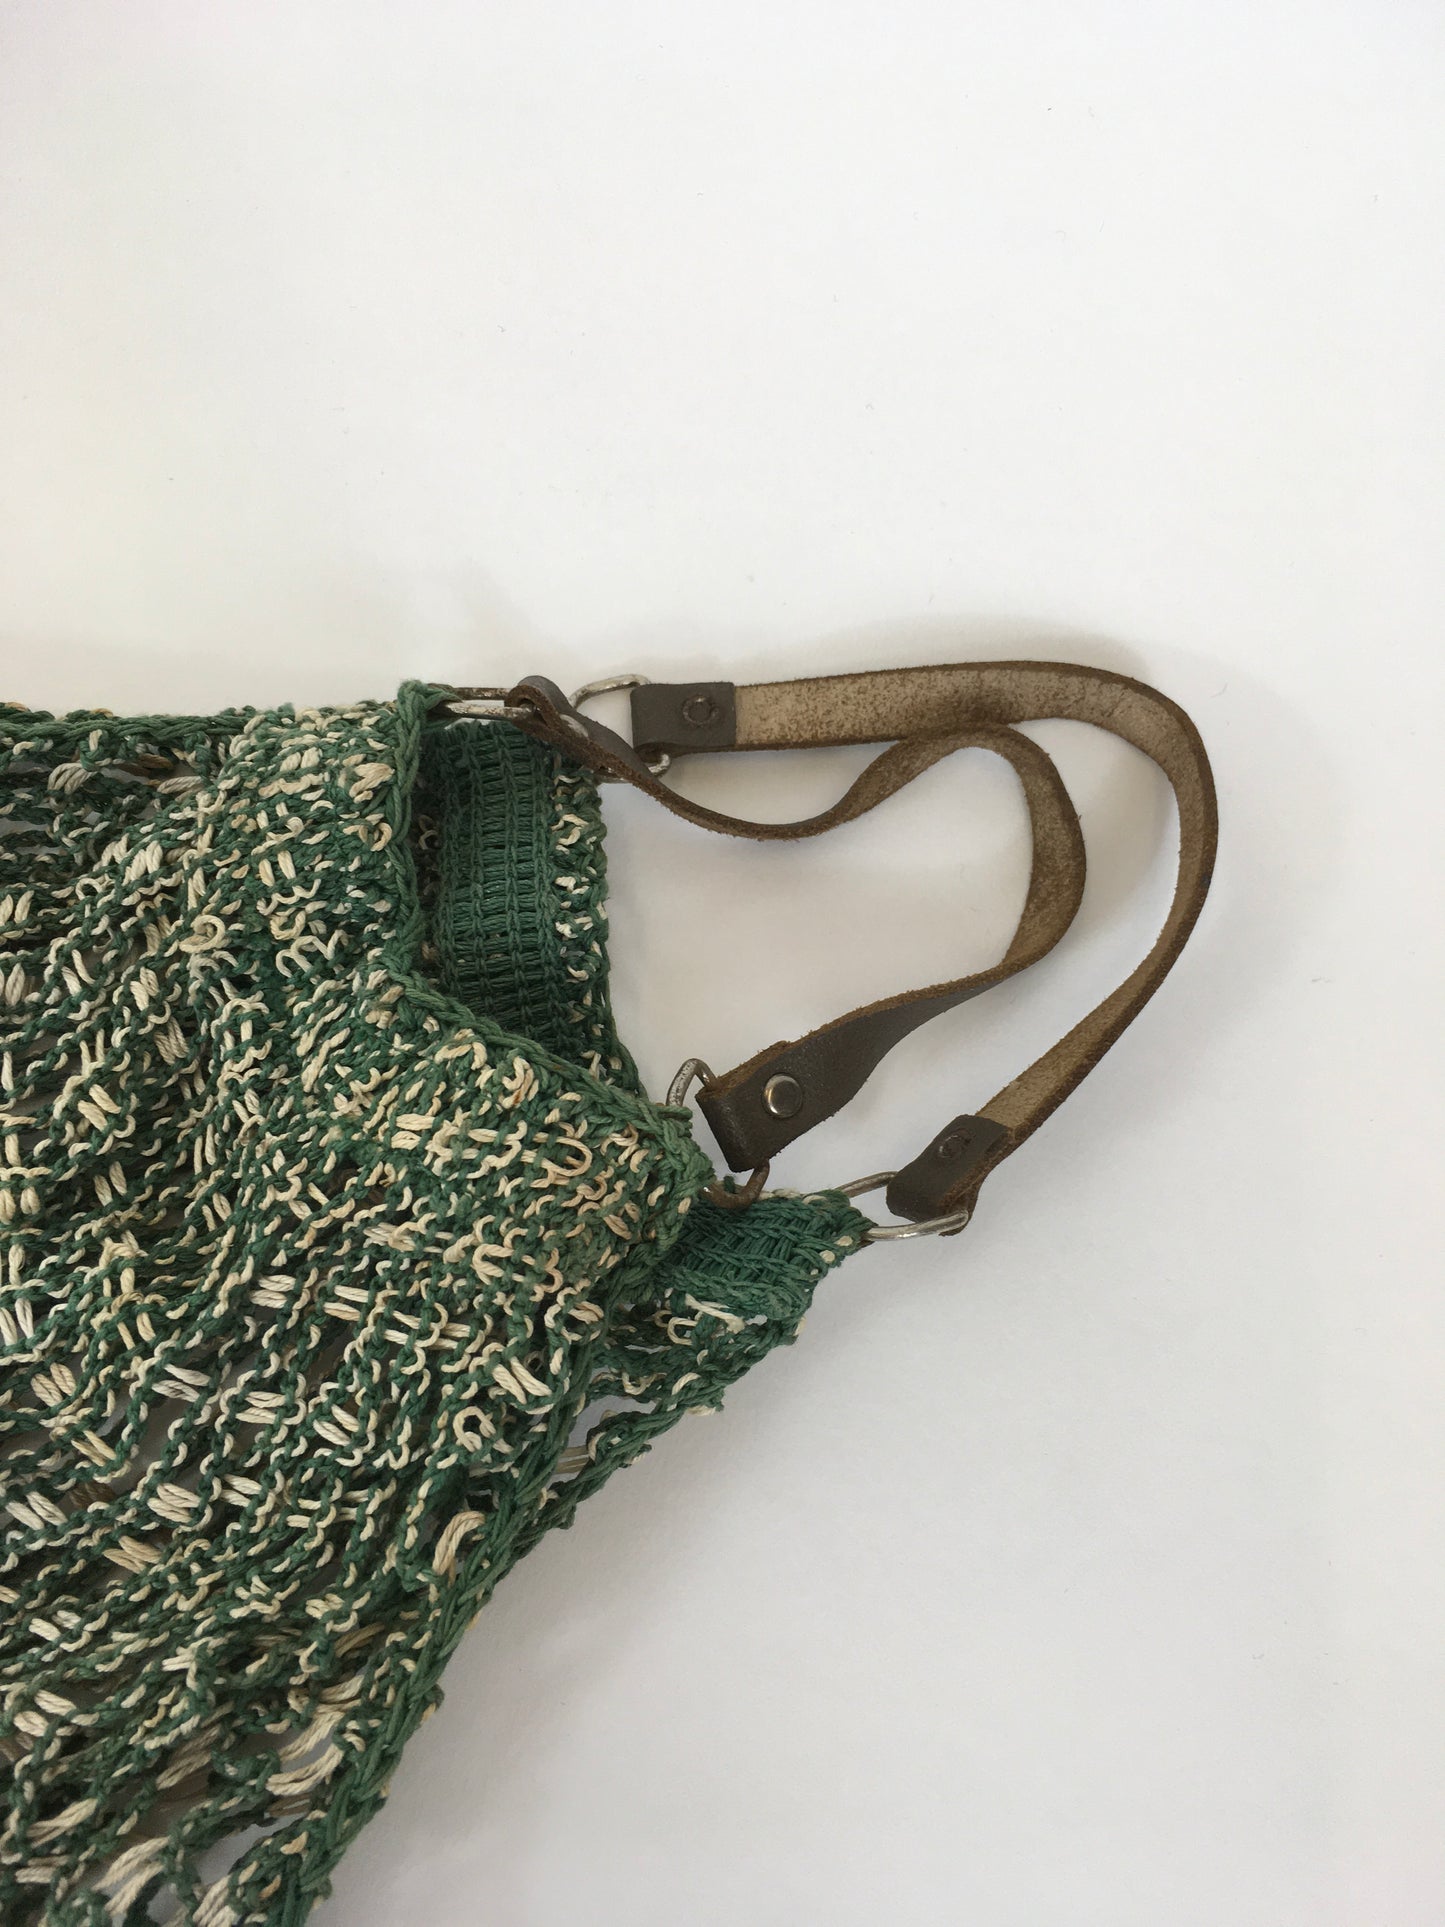 Original 1930’s / 1940’s String Bag with Leather Handles - In Green & White